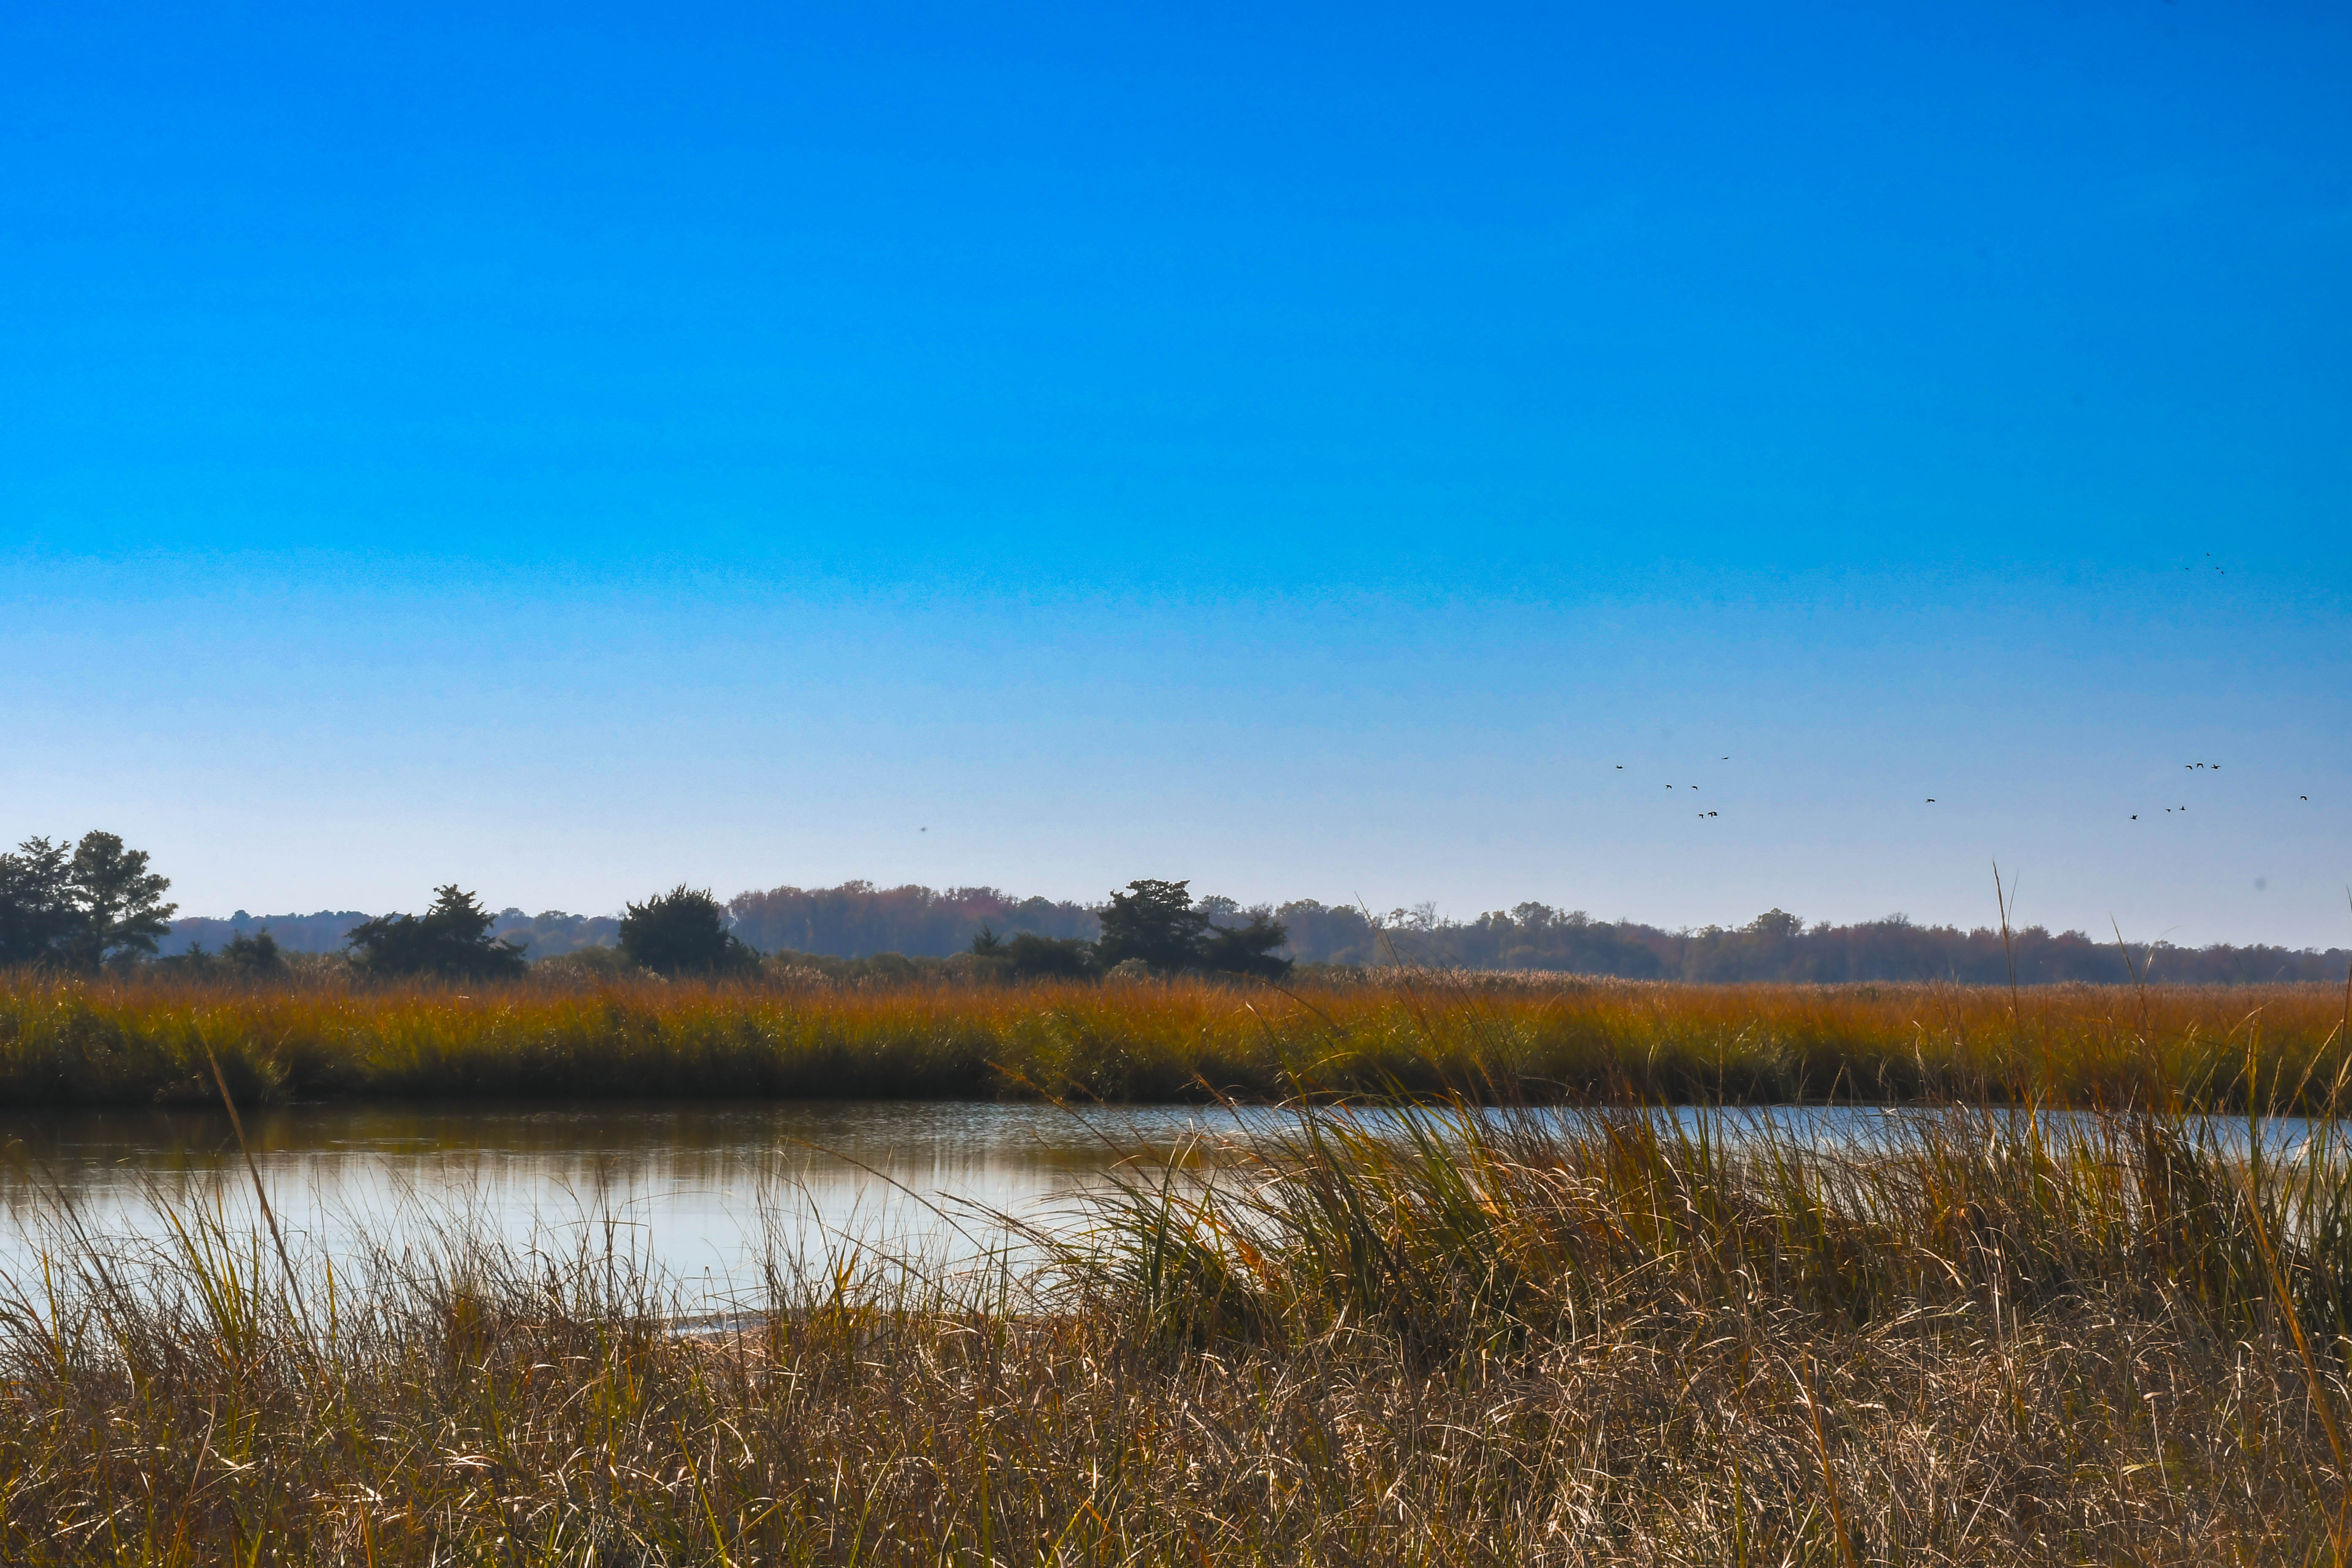 A view of a marsh with tall brown grass growing around the perimeter.